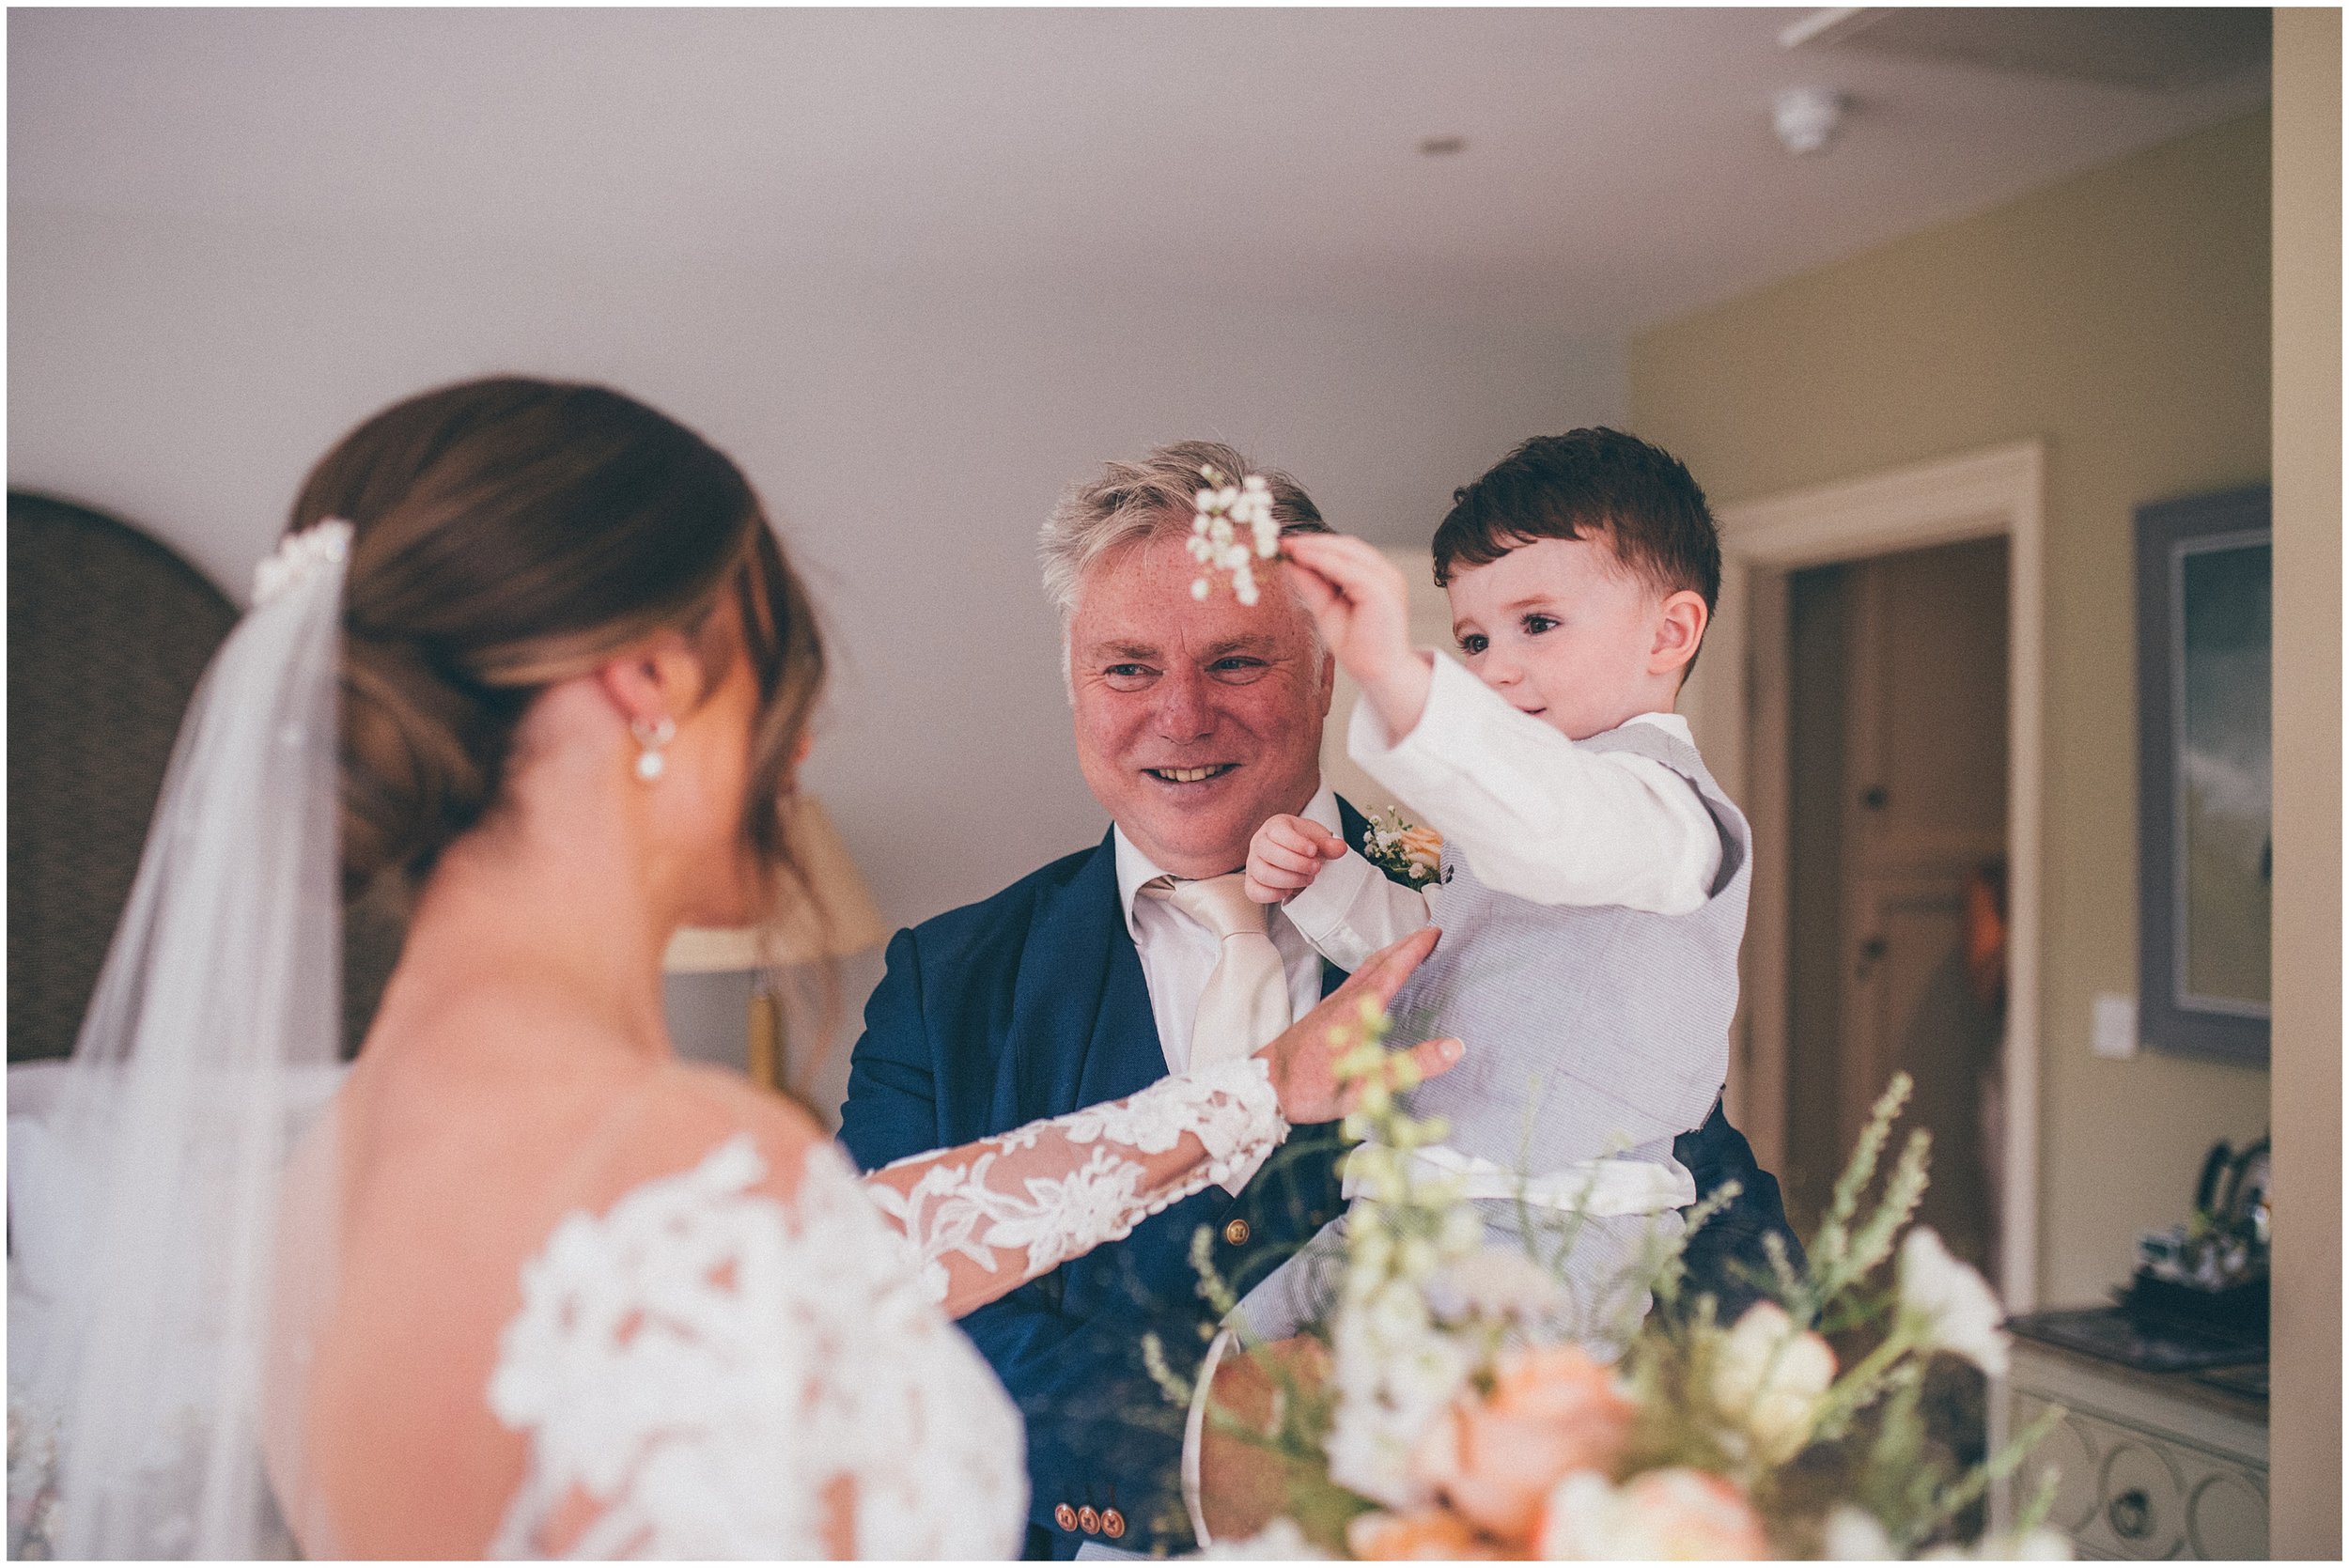 Father of the Bride sees his daughter as a bride for the first time at Abbeywood Estate in Delamere, Cheshire